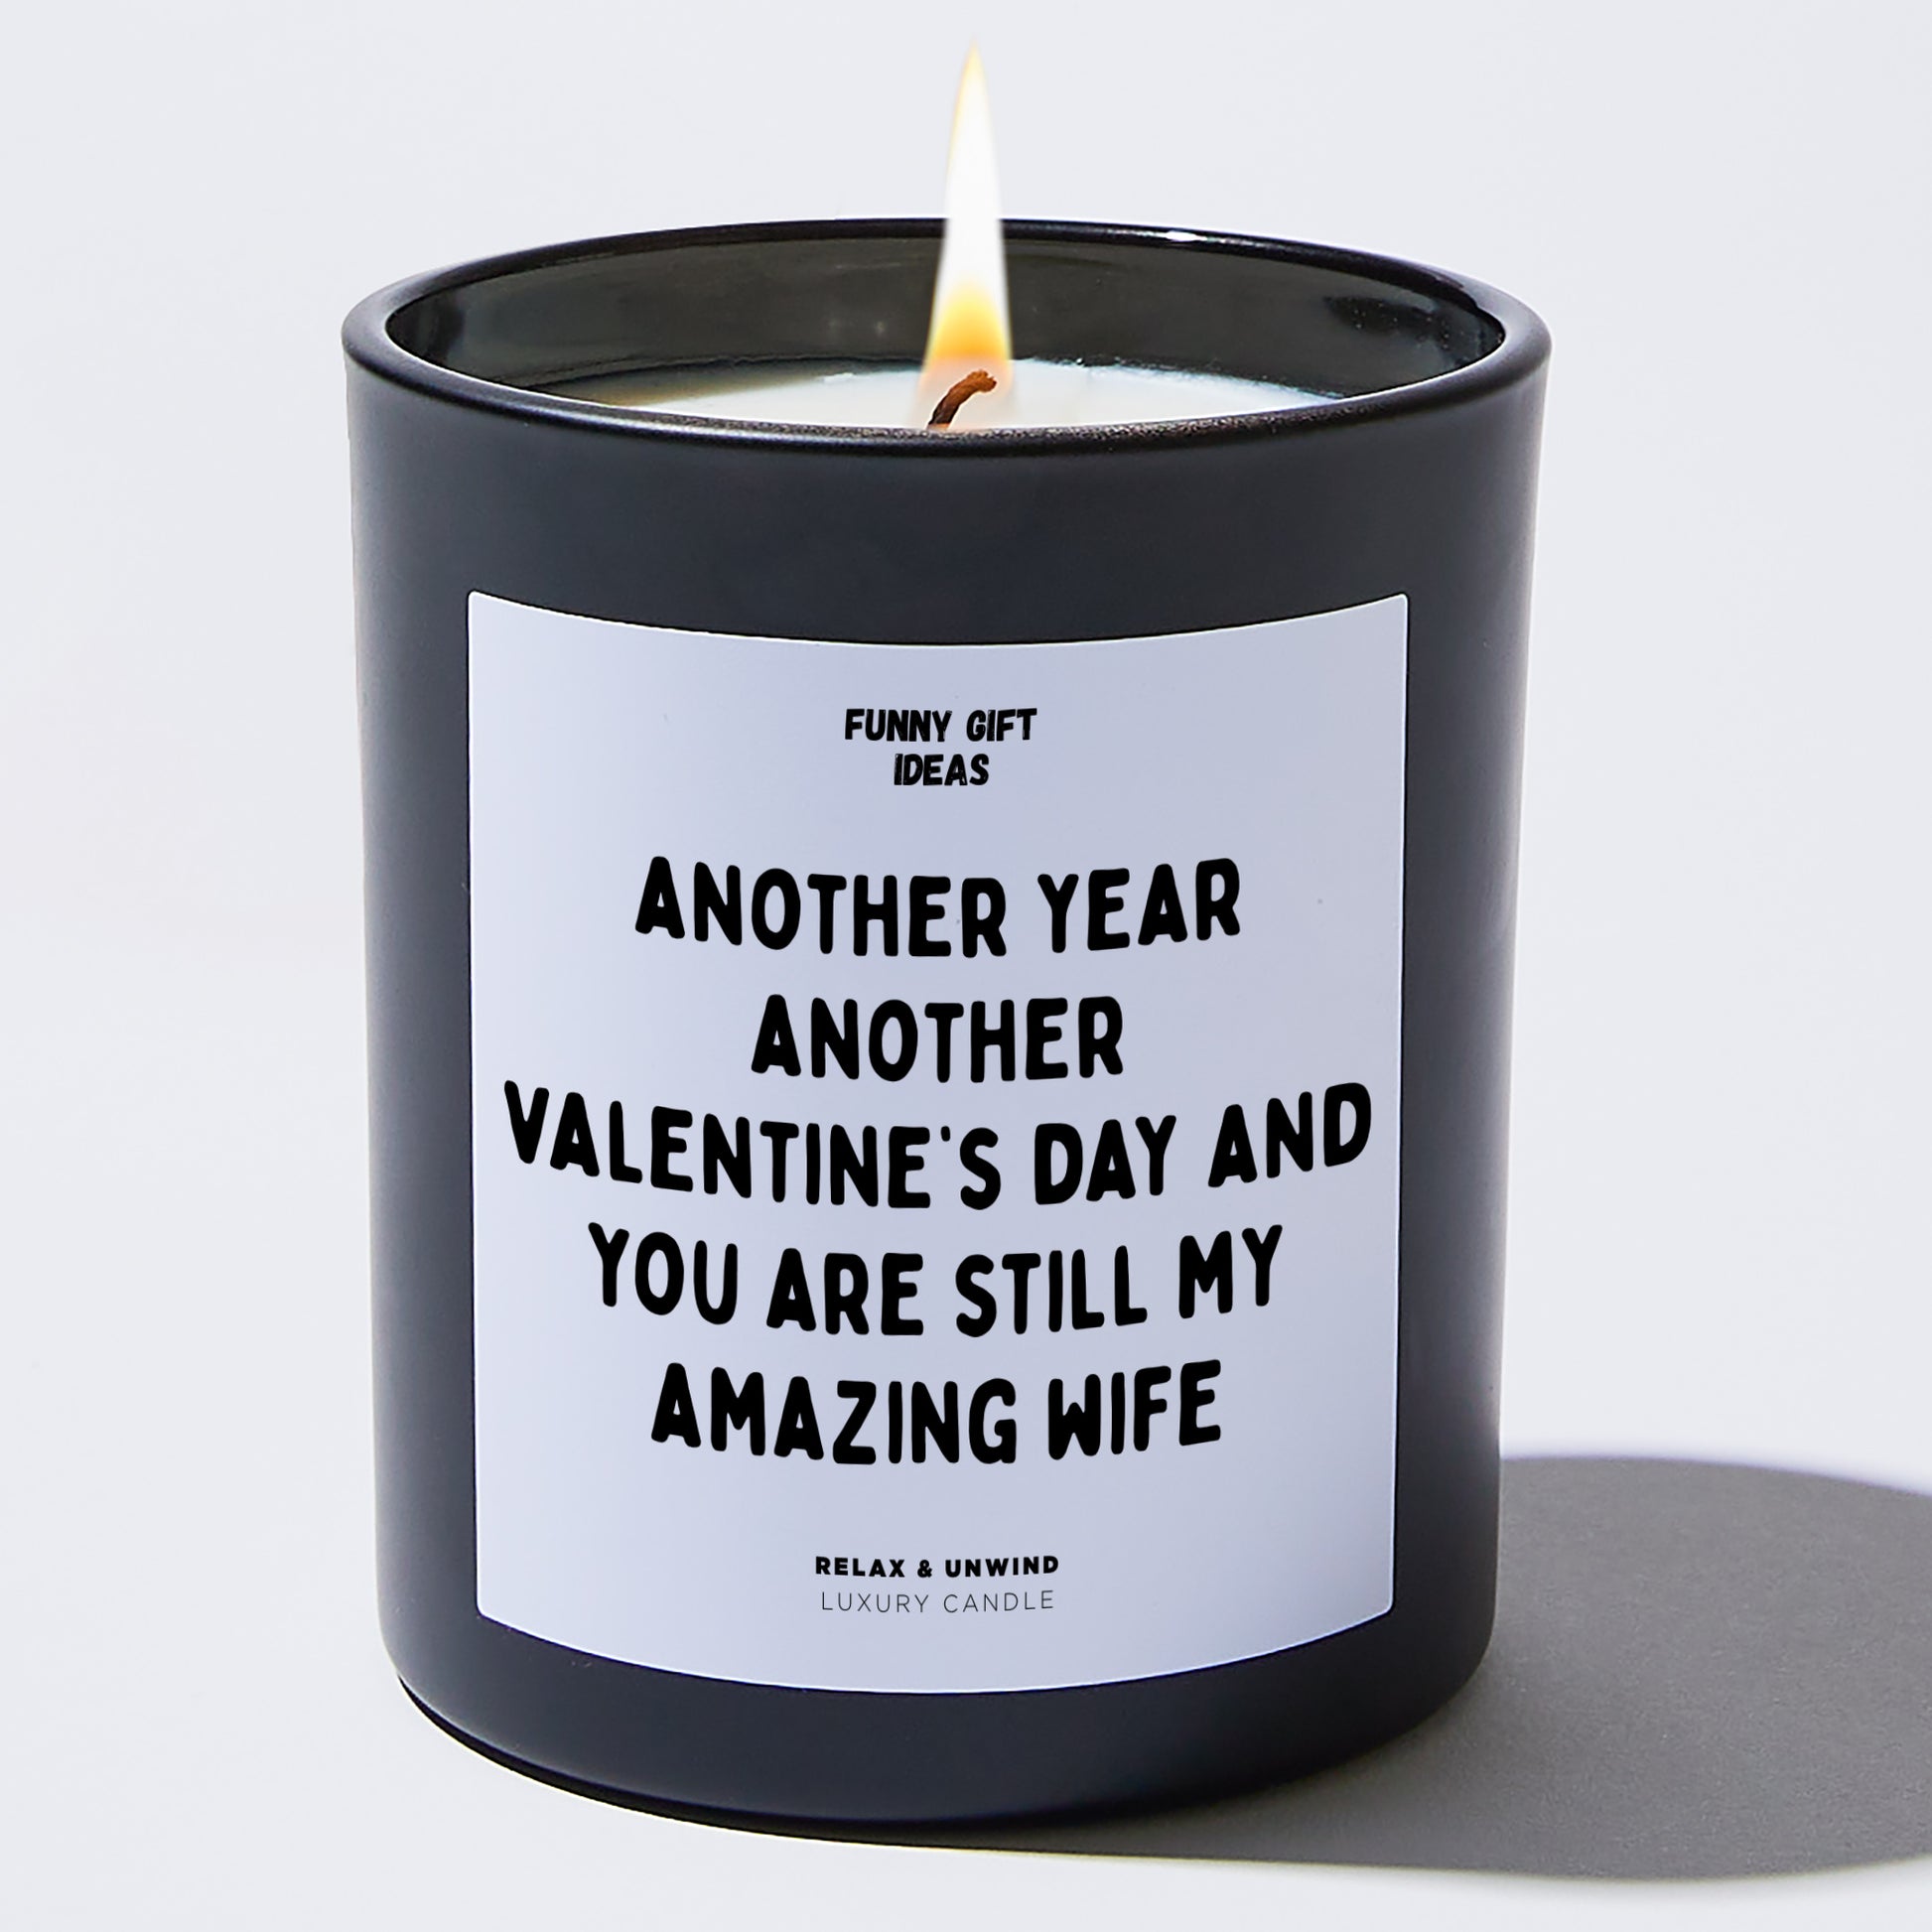 Anniversary Another Year, Another Valentine's Day, and You Are Still My Amazing Wife - Funny Gift Ideas